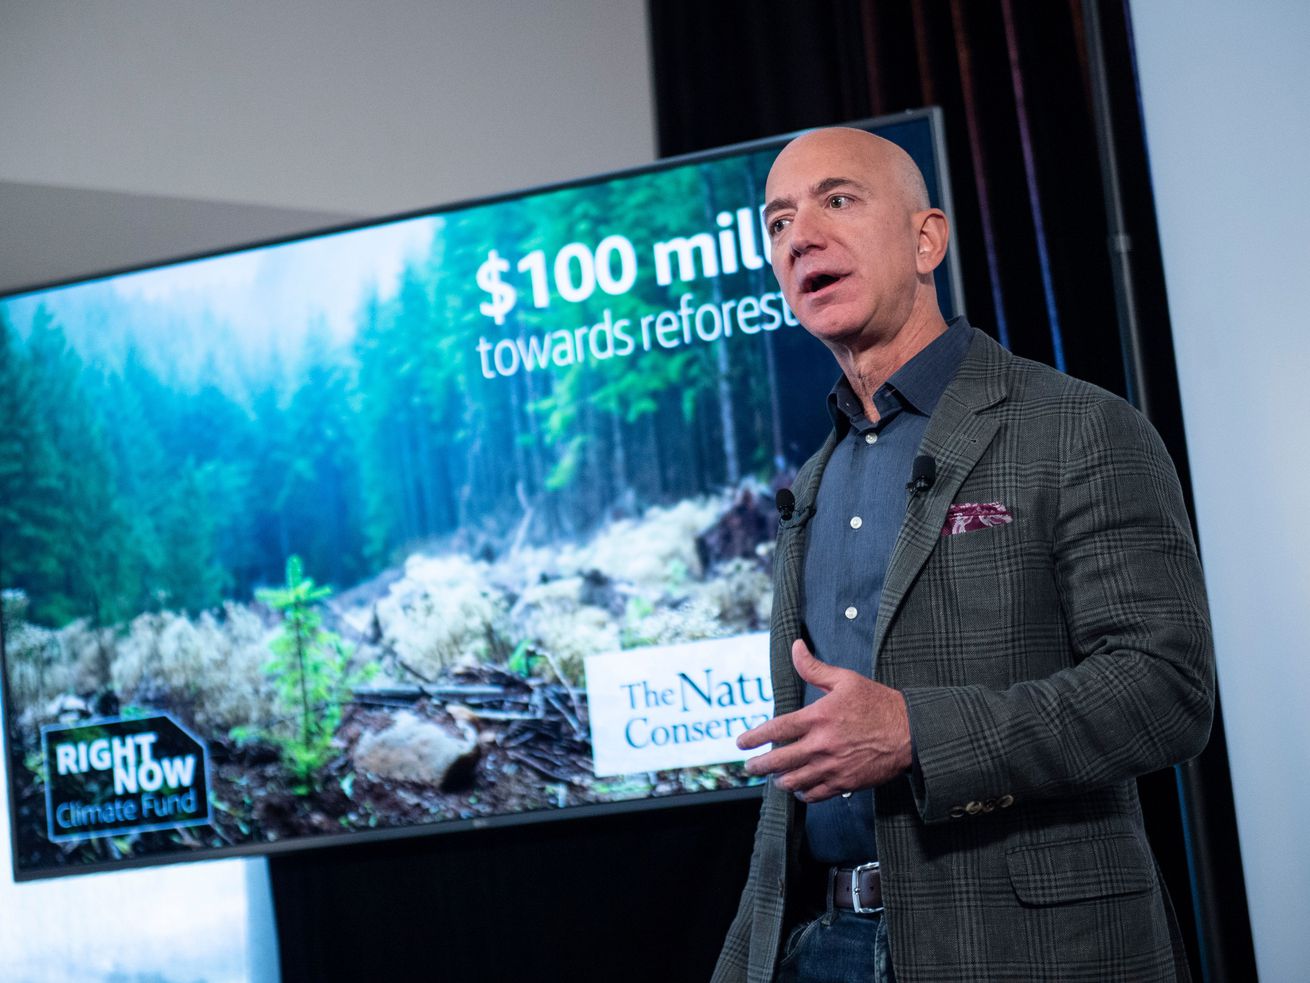 Amazon founder Jeff Bezos speaks onstage in front of a screen showing a wooded landscape and the words “$100 million.”